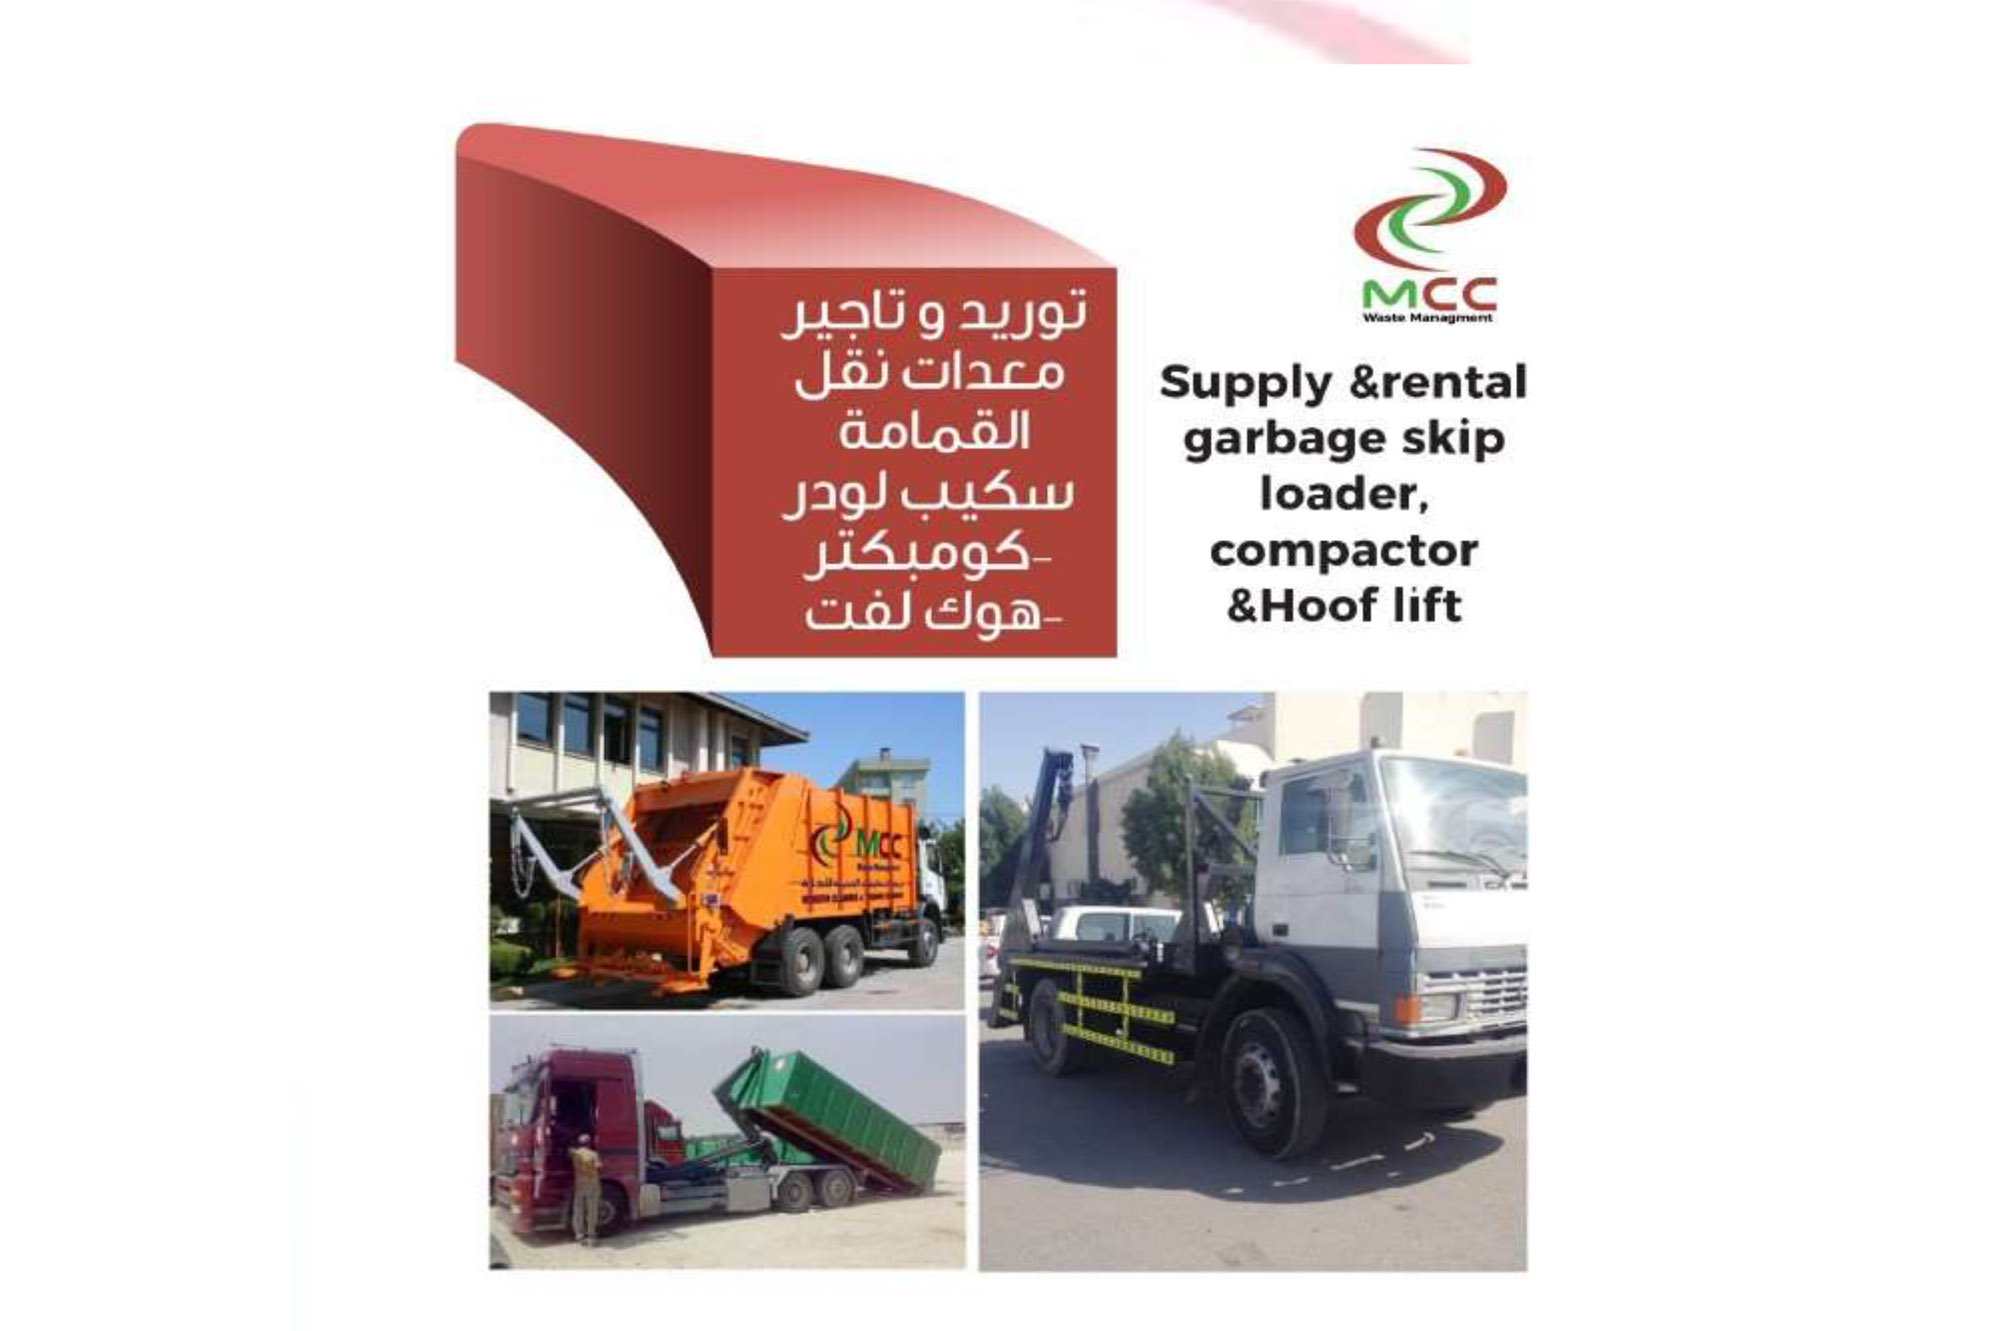 Garbage Skip Loader for Rent in Qatar | Qatar modern cleaning and waste management company MCC Qatar is the leading Waste Management companies in Qatar recycling | qatar waste management companies | manage of waste in Qatar